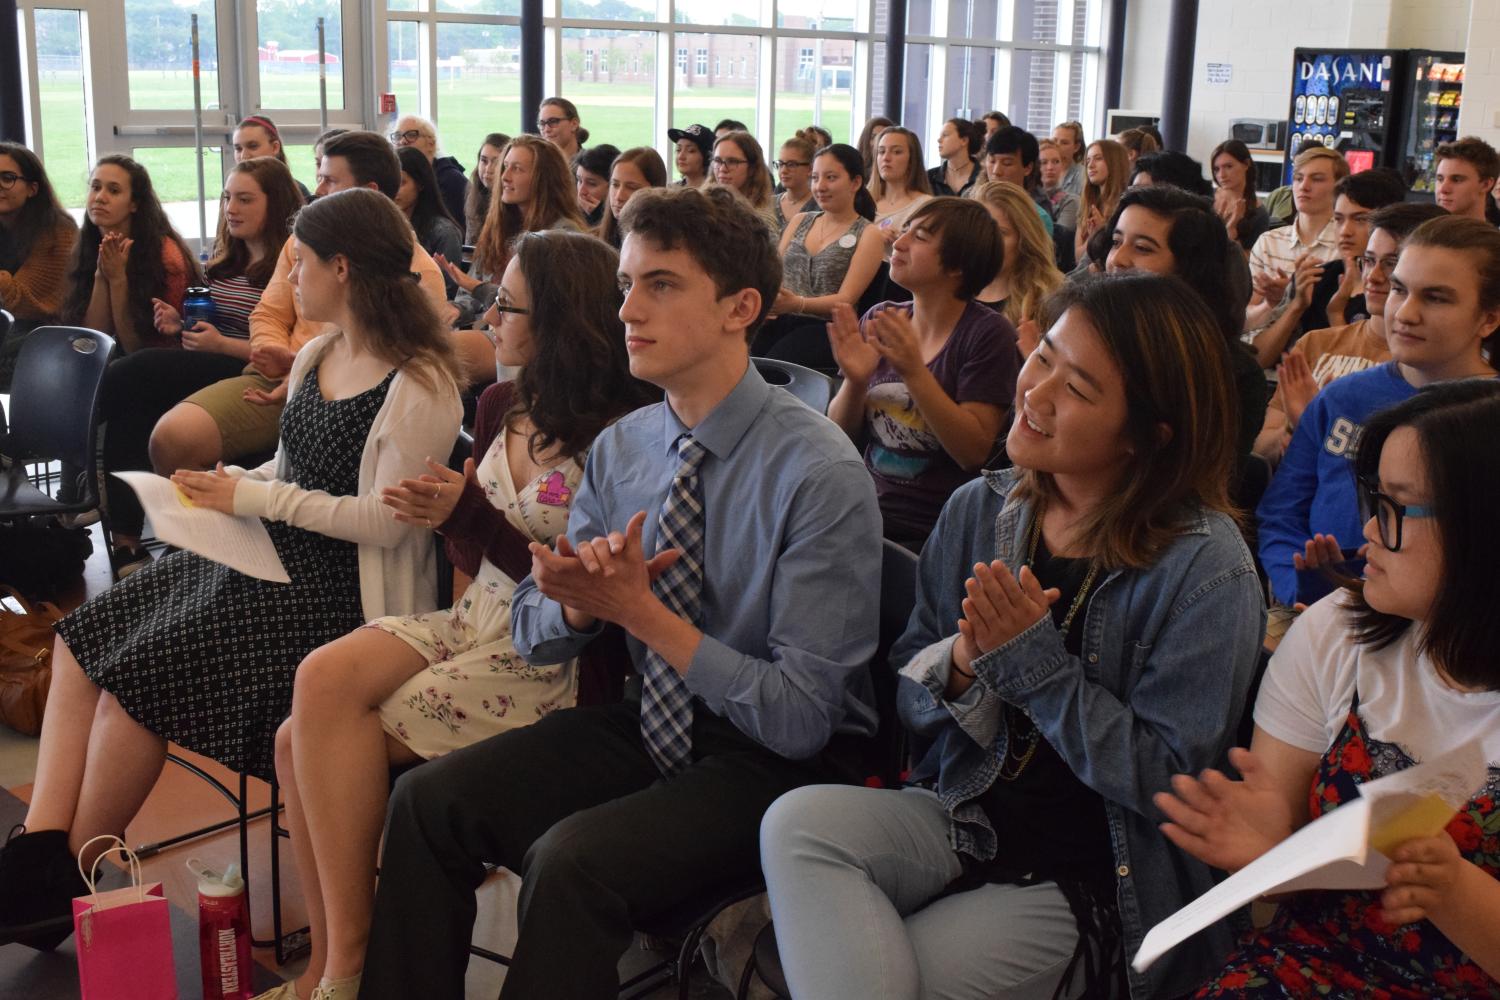 The Class of 2018 listened to speeches from ten candidates for class council on Monday.